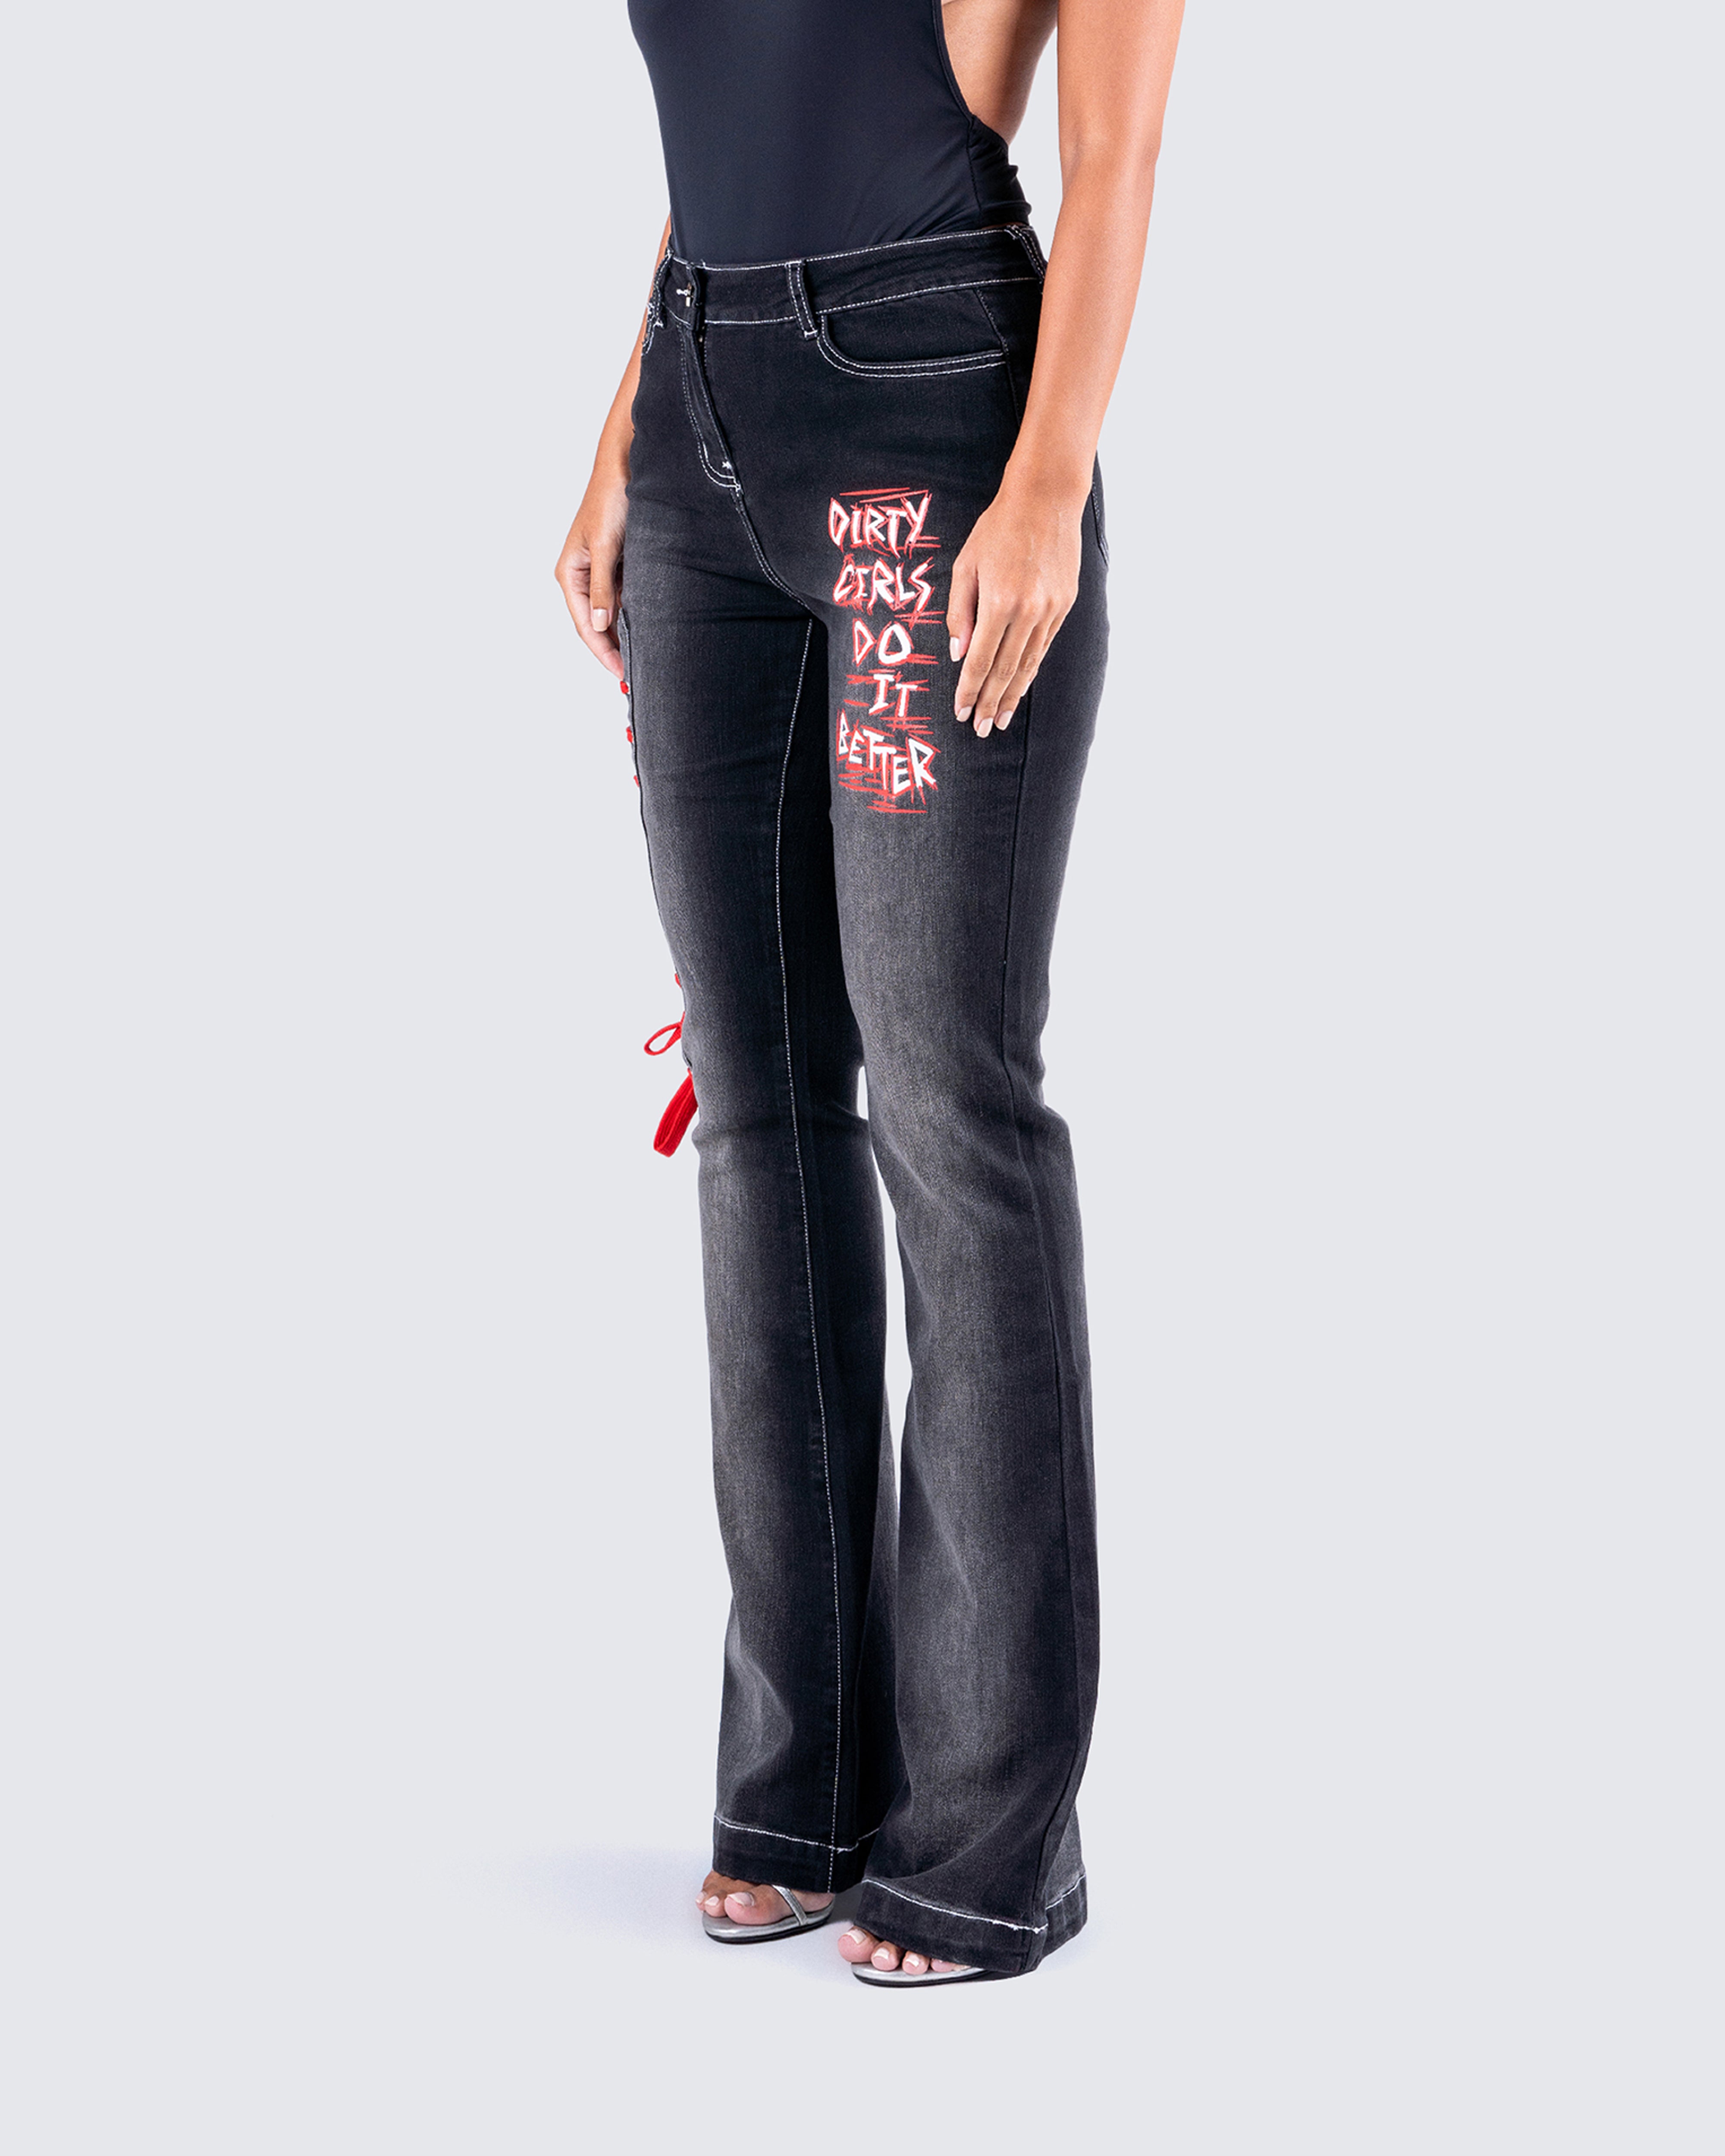 Buy Blue Jeans & Jeggings for Women by LEE COOPER Online | Ajio.com